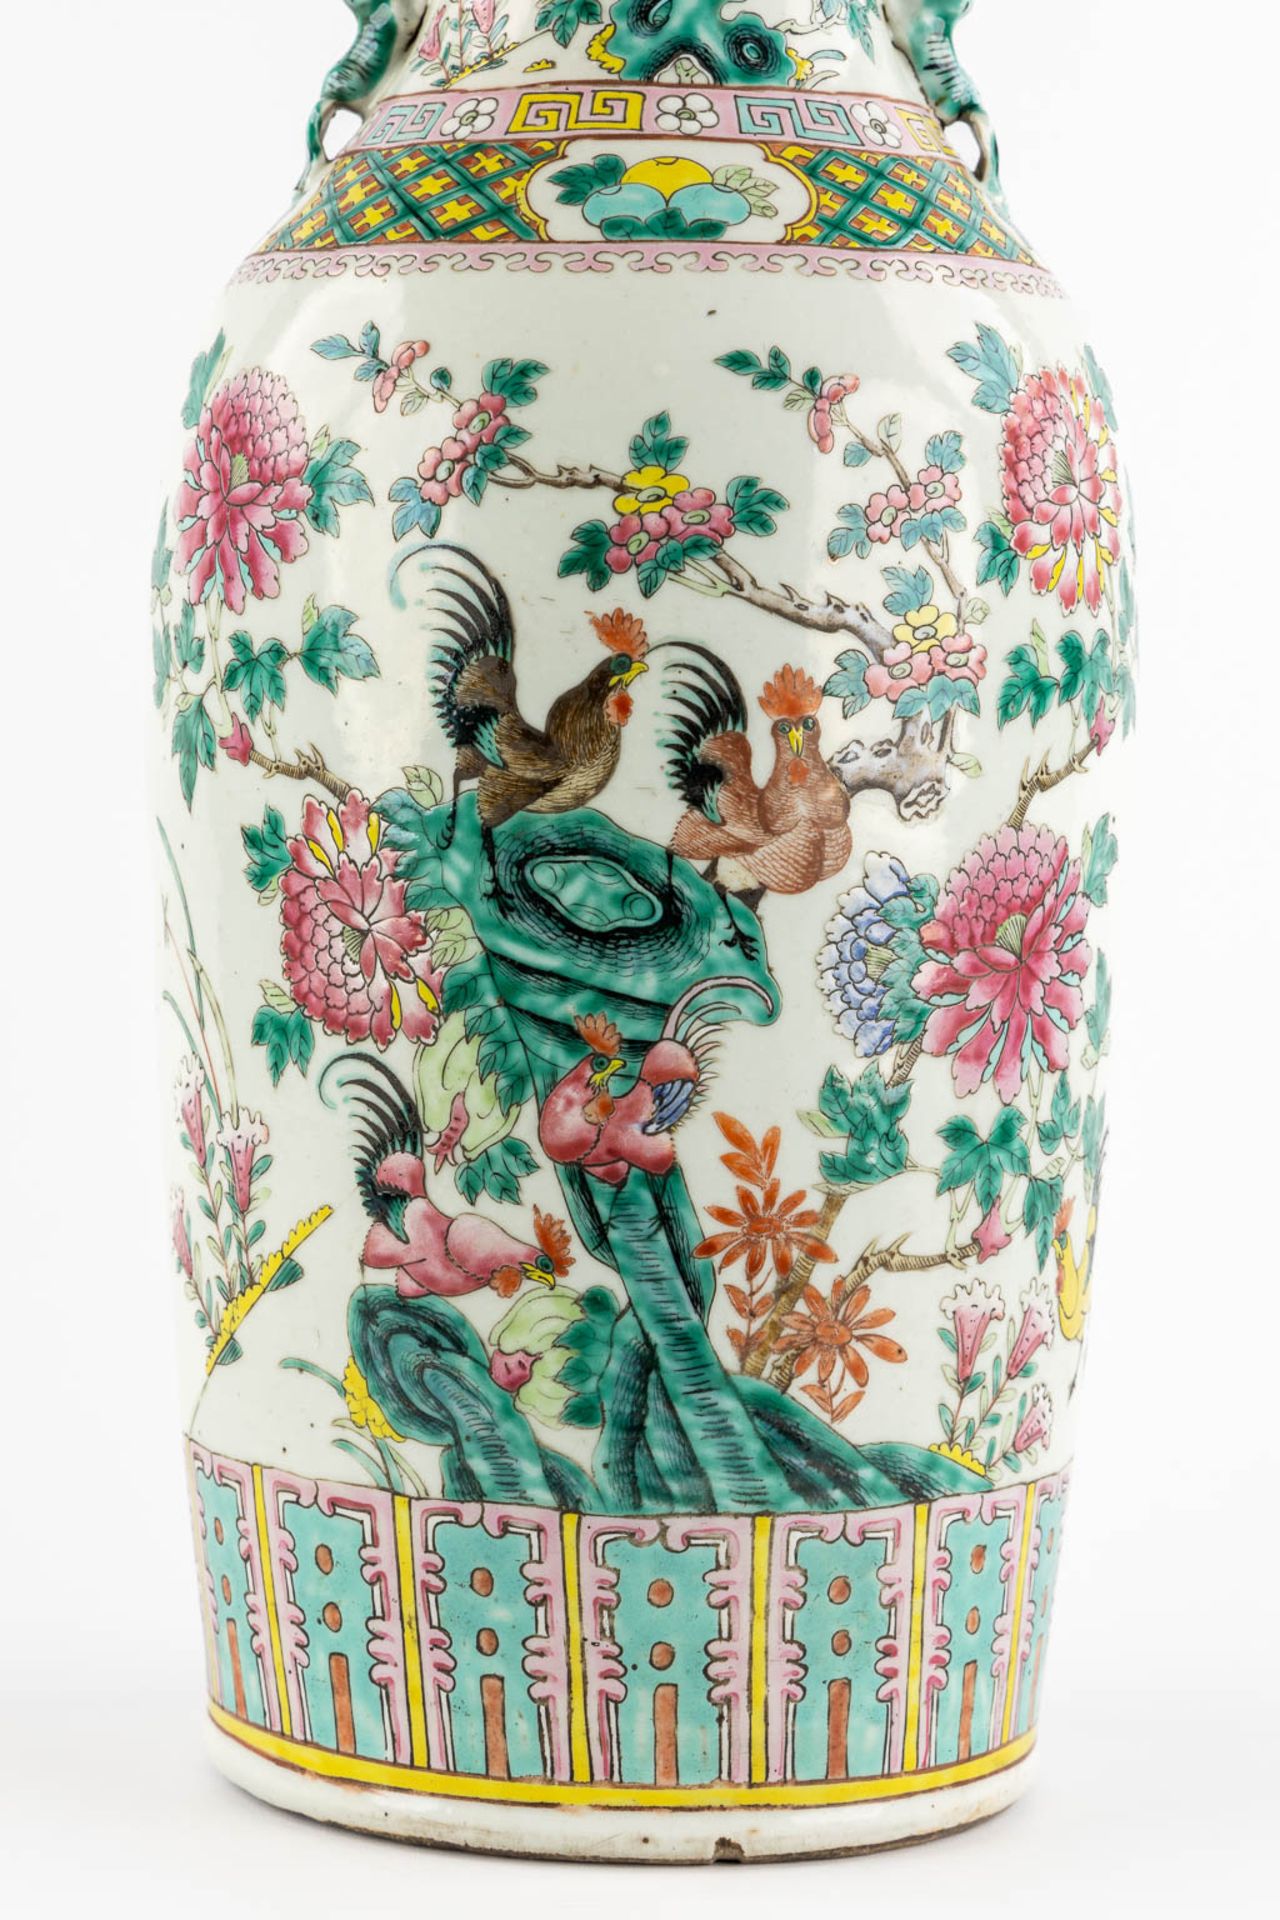 A large Chinese Famille Rose vase decorated with Chicken and Flora. (H:59 x D:23 cm) - Image 10 of 11